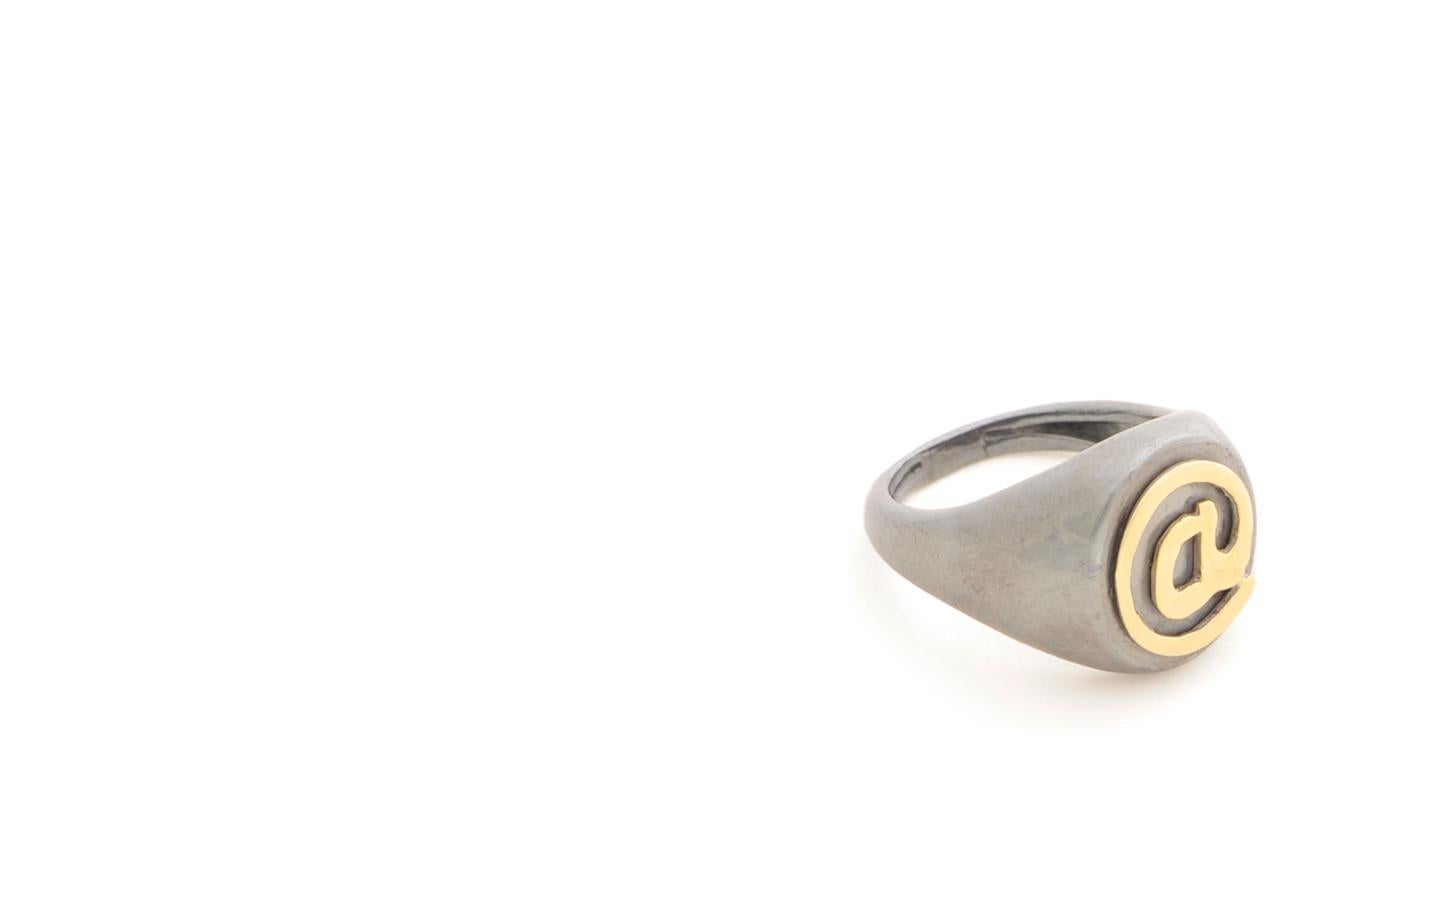 Rossella Ugolini Signet Ring Collection @ Contemporary Signet Ring.  Handcrafted @ made of 18K Yellow Gold crafted on Bold Silver Sterling Signet Ring.  The Shank is available in dark or grey burnish sterling silver. 
Signet Initial Rings are among